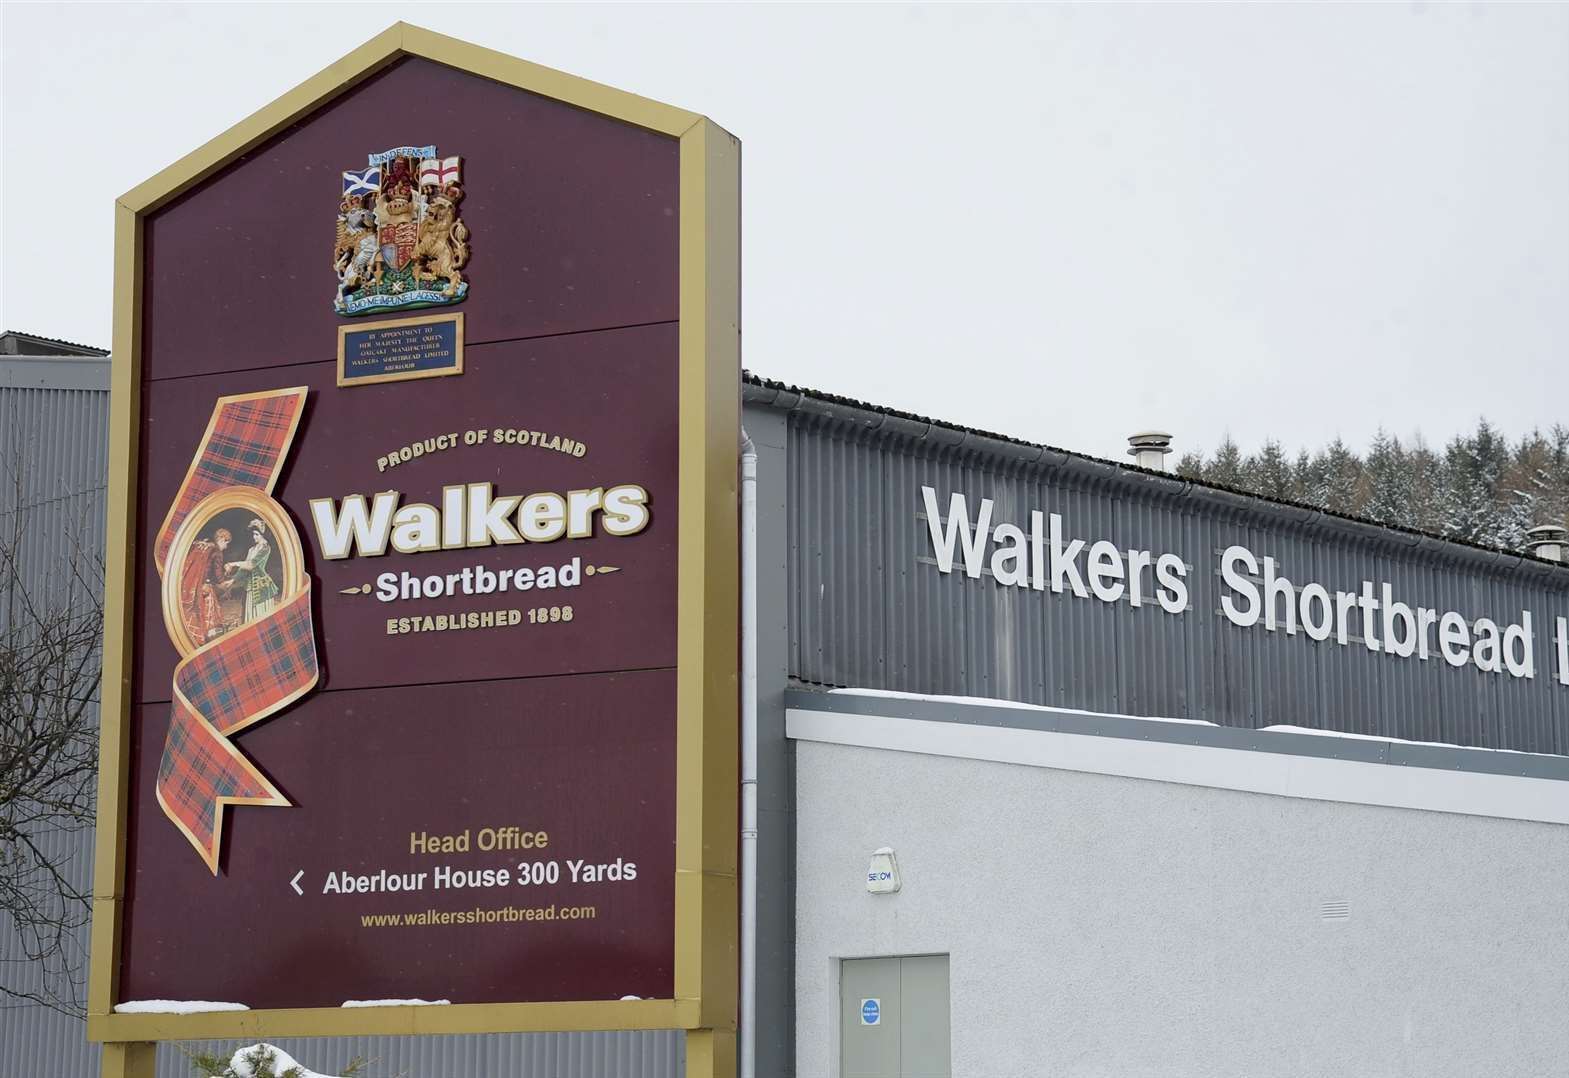 Walker's Shortbread has confirmed that 17 Elgin-based workers have tested positive for Covid-19.